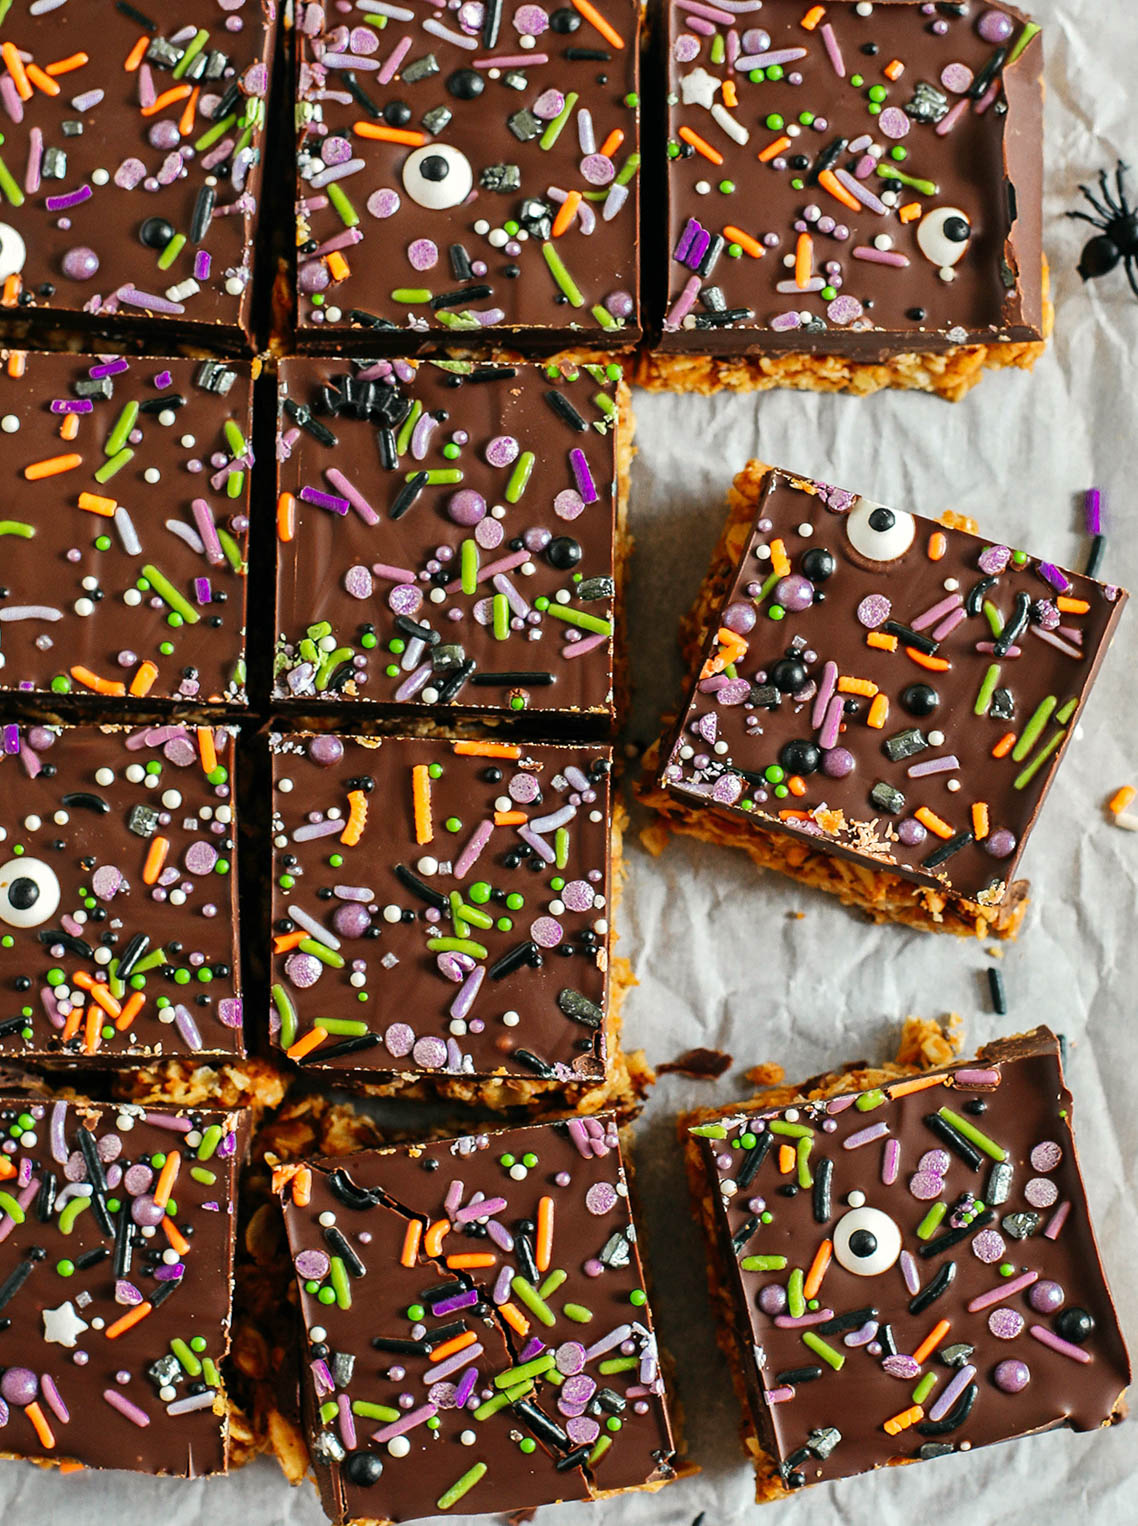 These No Bake Chocolate Pumpkin Bars are filled with delicious ingredients like peanut butter, pumpkin, rolled oats, and puffed rice cereal all topped with melted dark chocolate and festive sprinkles for the perfect sweet treat!